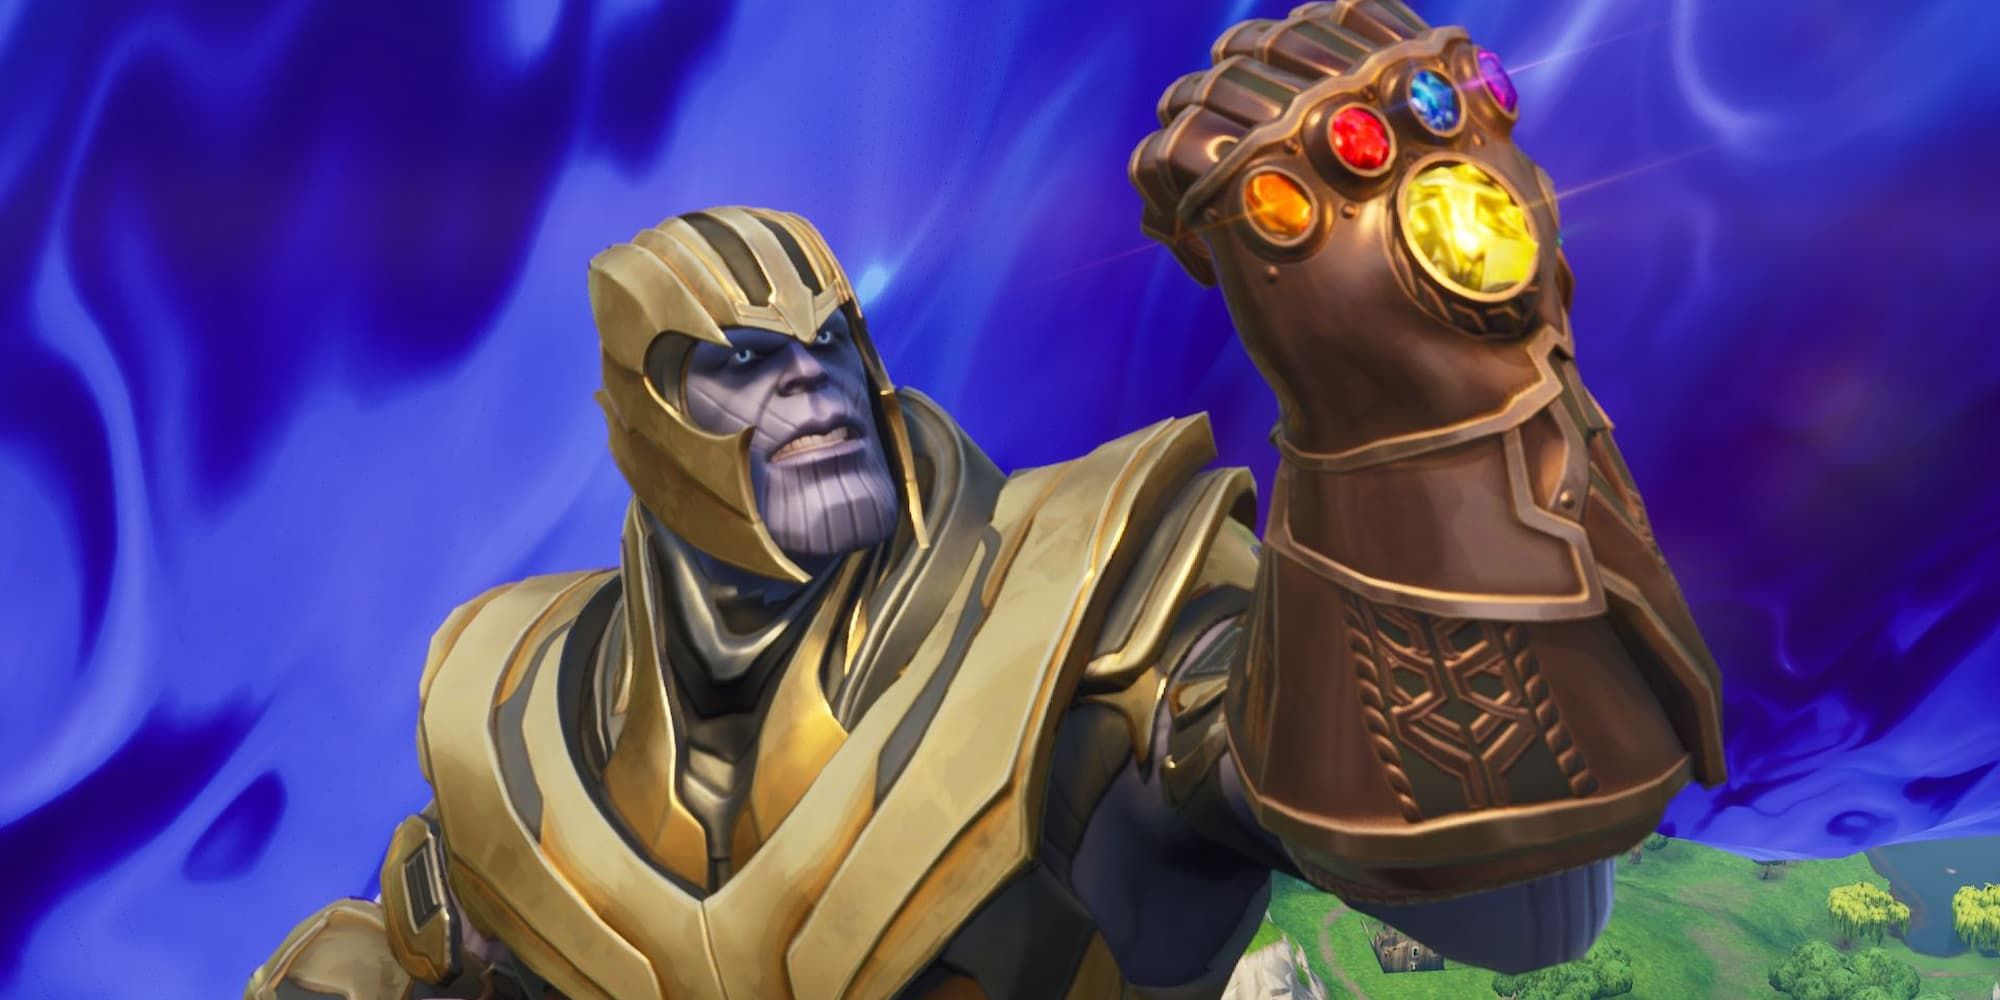 Thanos wields the Infinity Gauntlet in Fortnite.